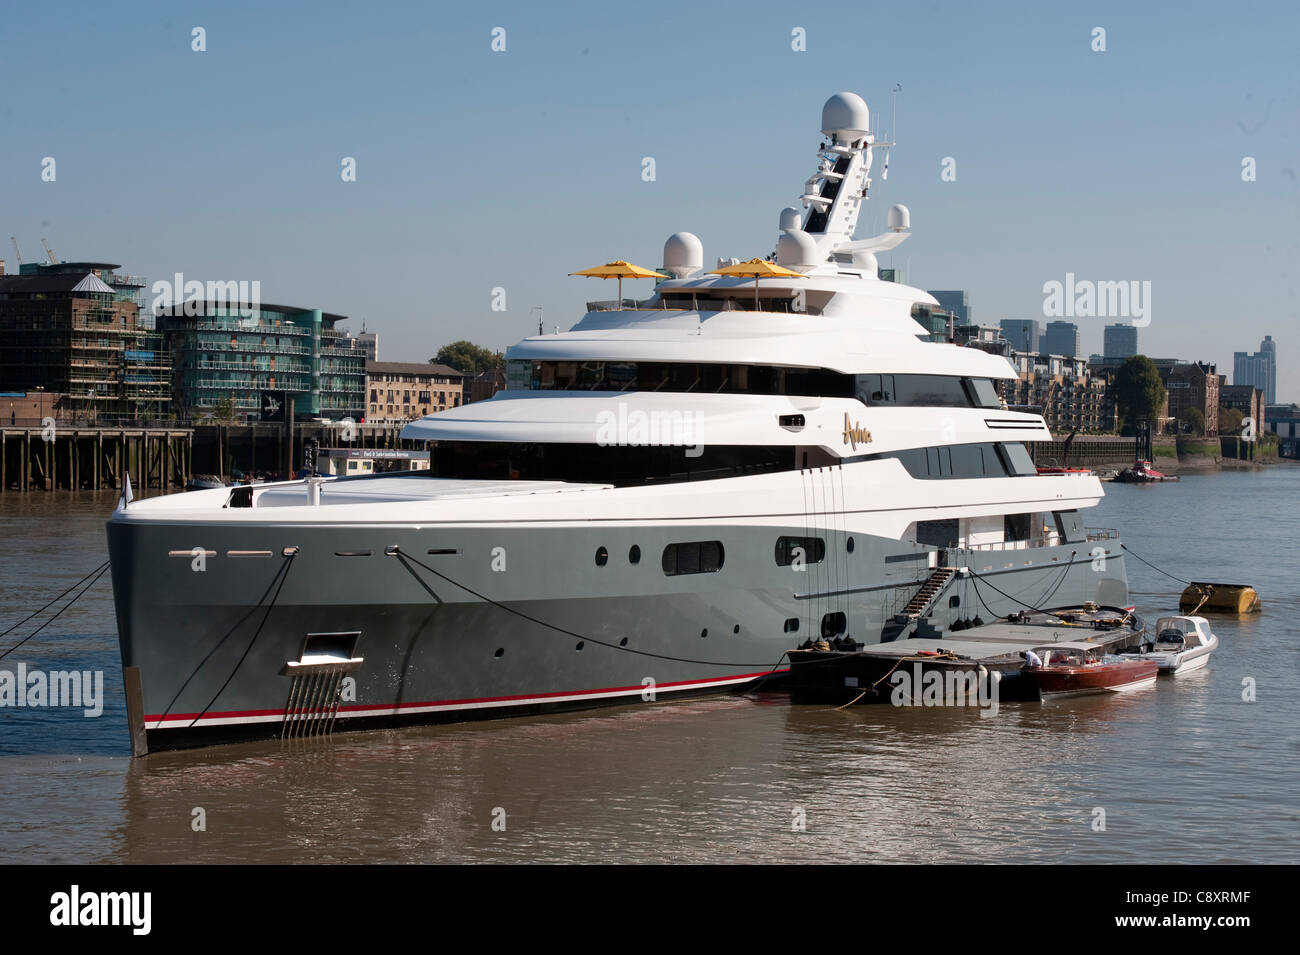 Luxury yacht owned by billionaire Joe Lewis docked in the Thames near Tower Bridge London Stock Photo